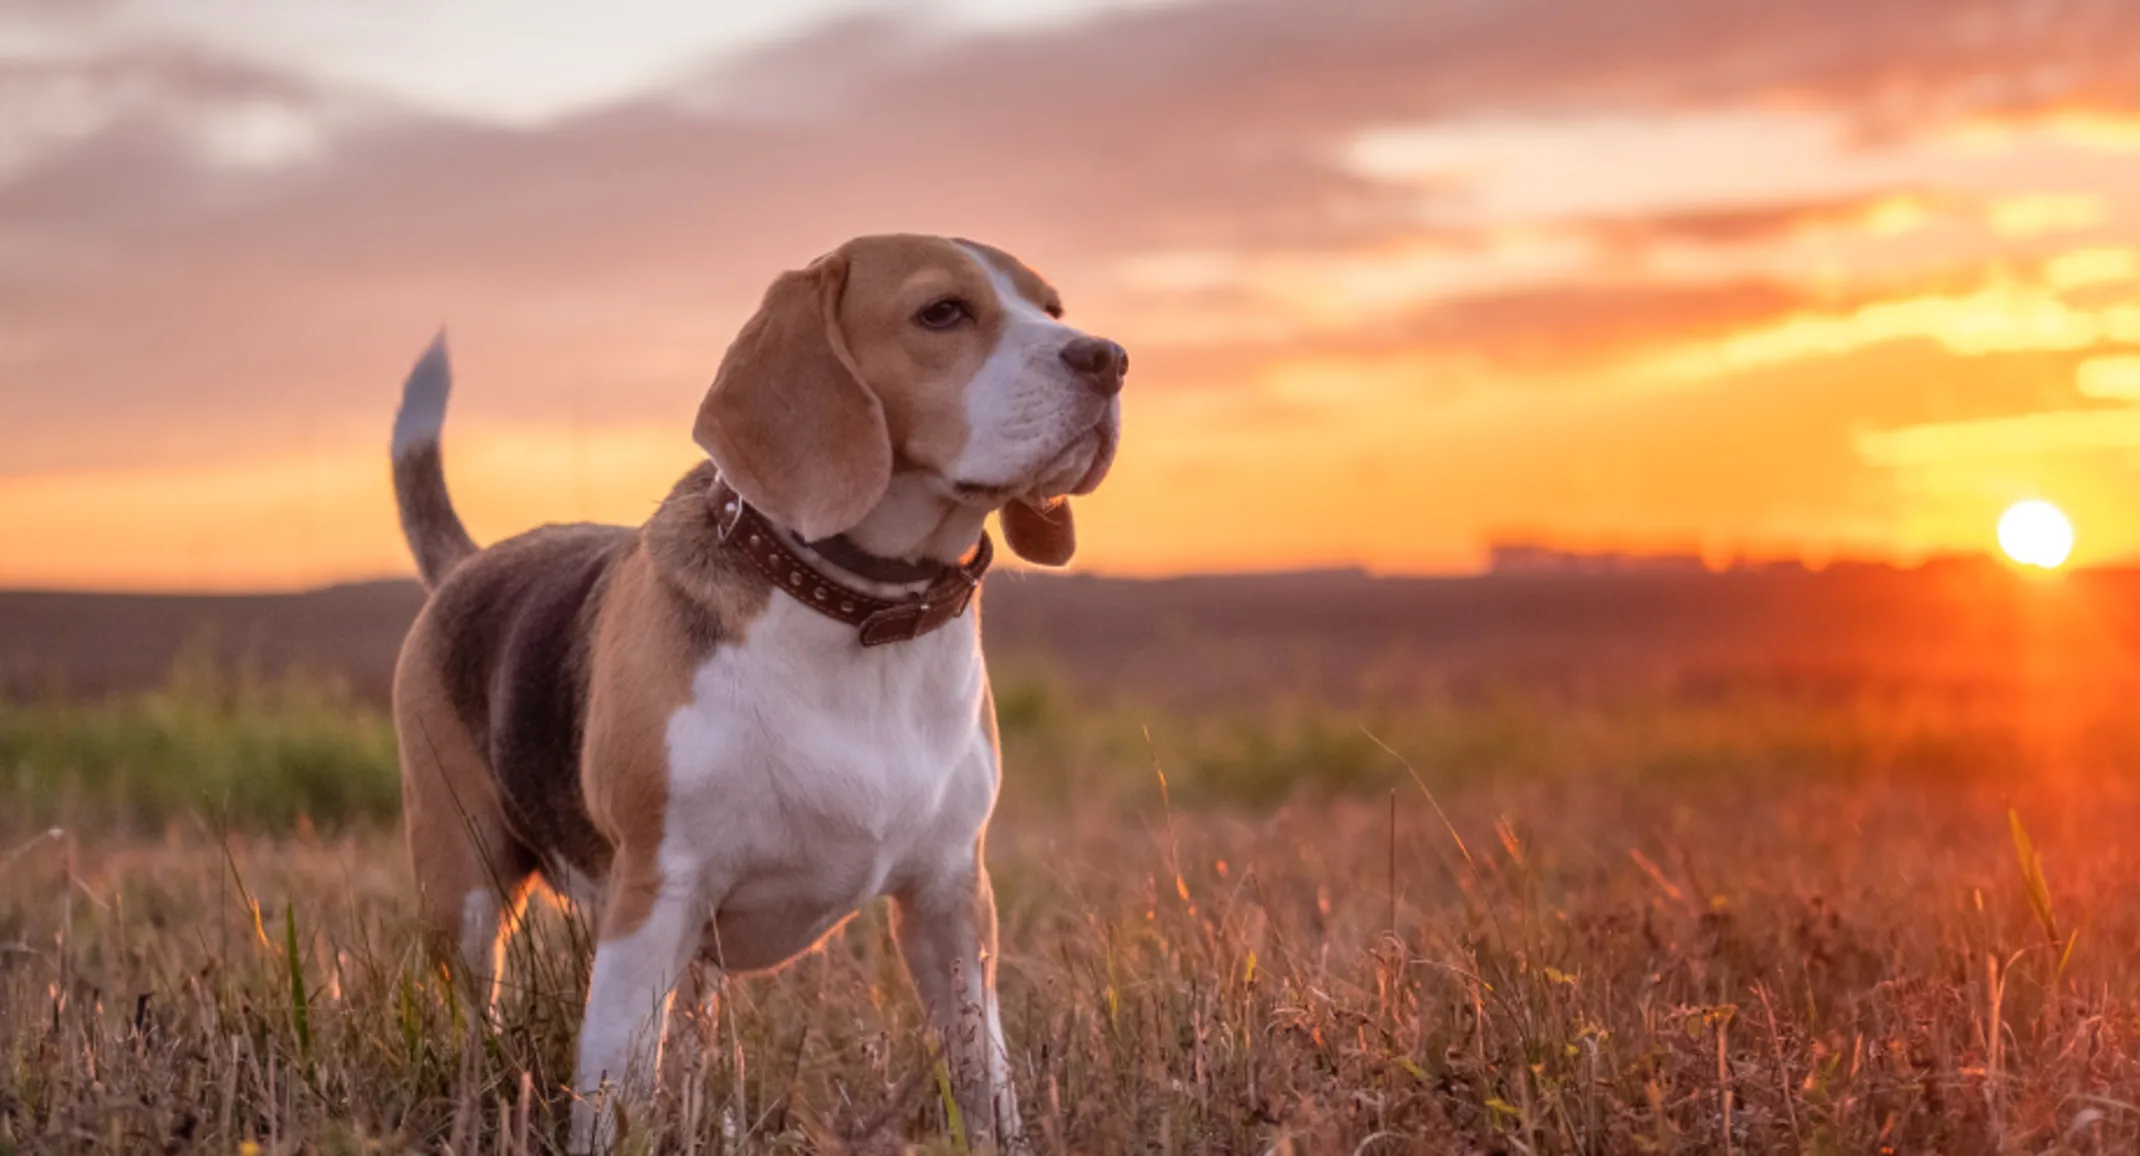 Beagle standing in a grassy field at sunset